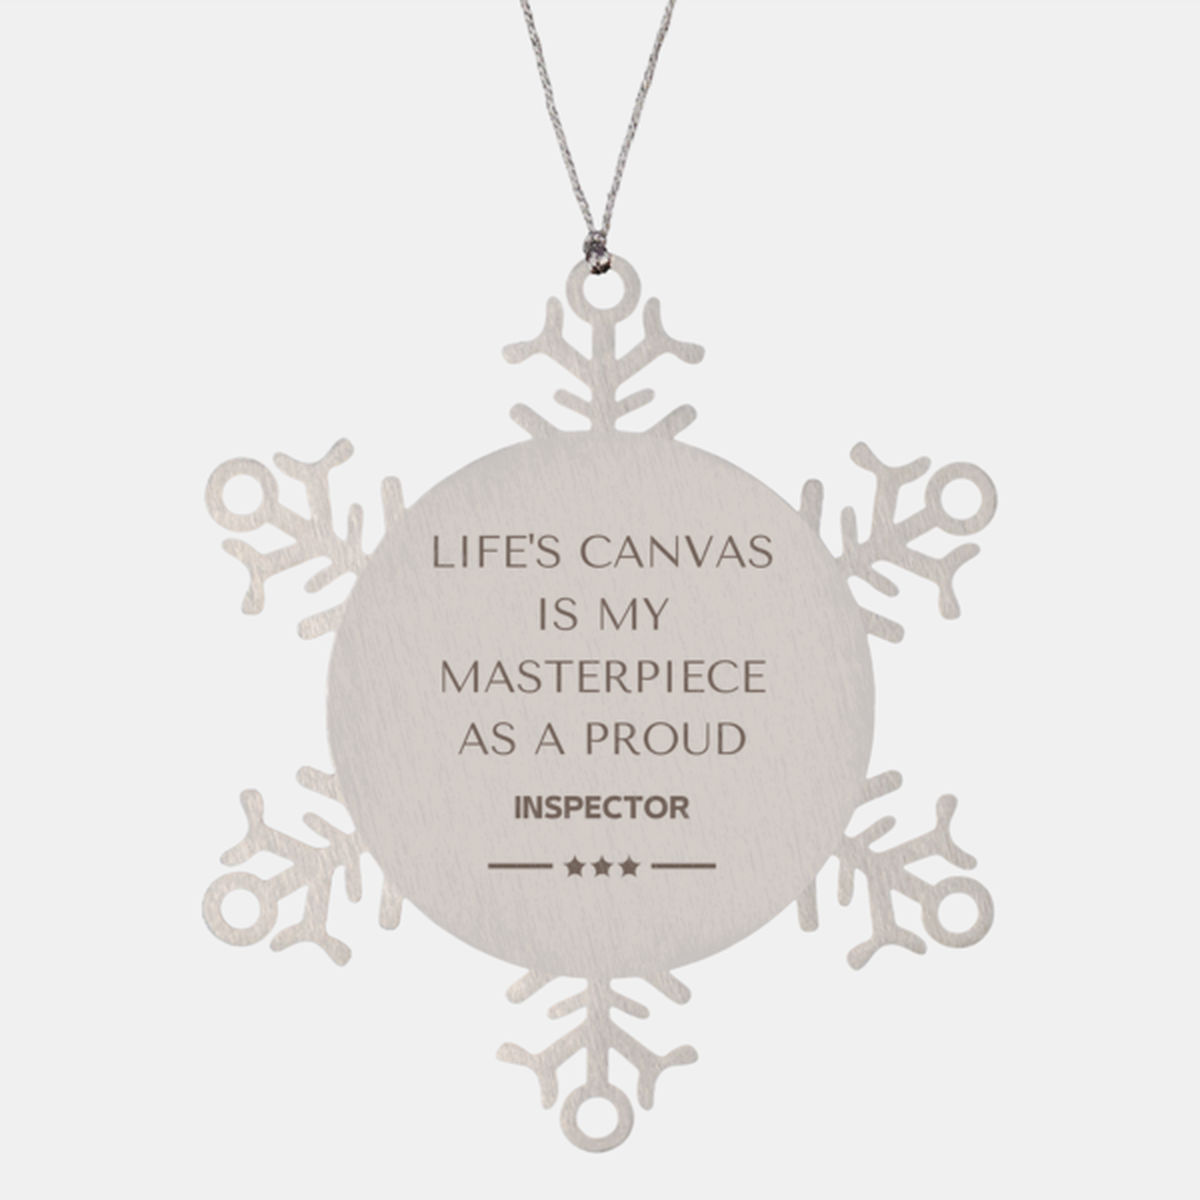 Proud Inspector Gifts, Life's canvas is my masterpiece, Epic Birthday Christmas Unique Snowflake Ornament For Inspector, Coworkers, Men, Women, Friends